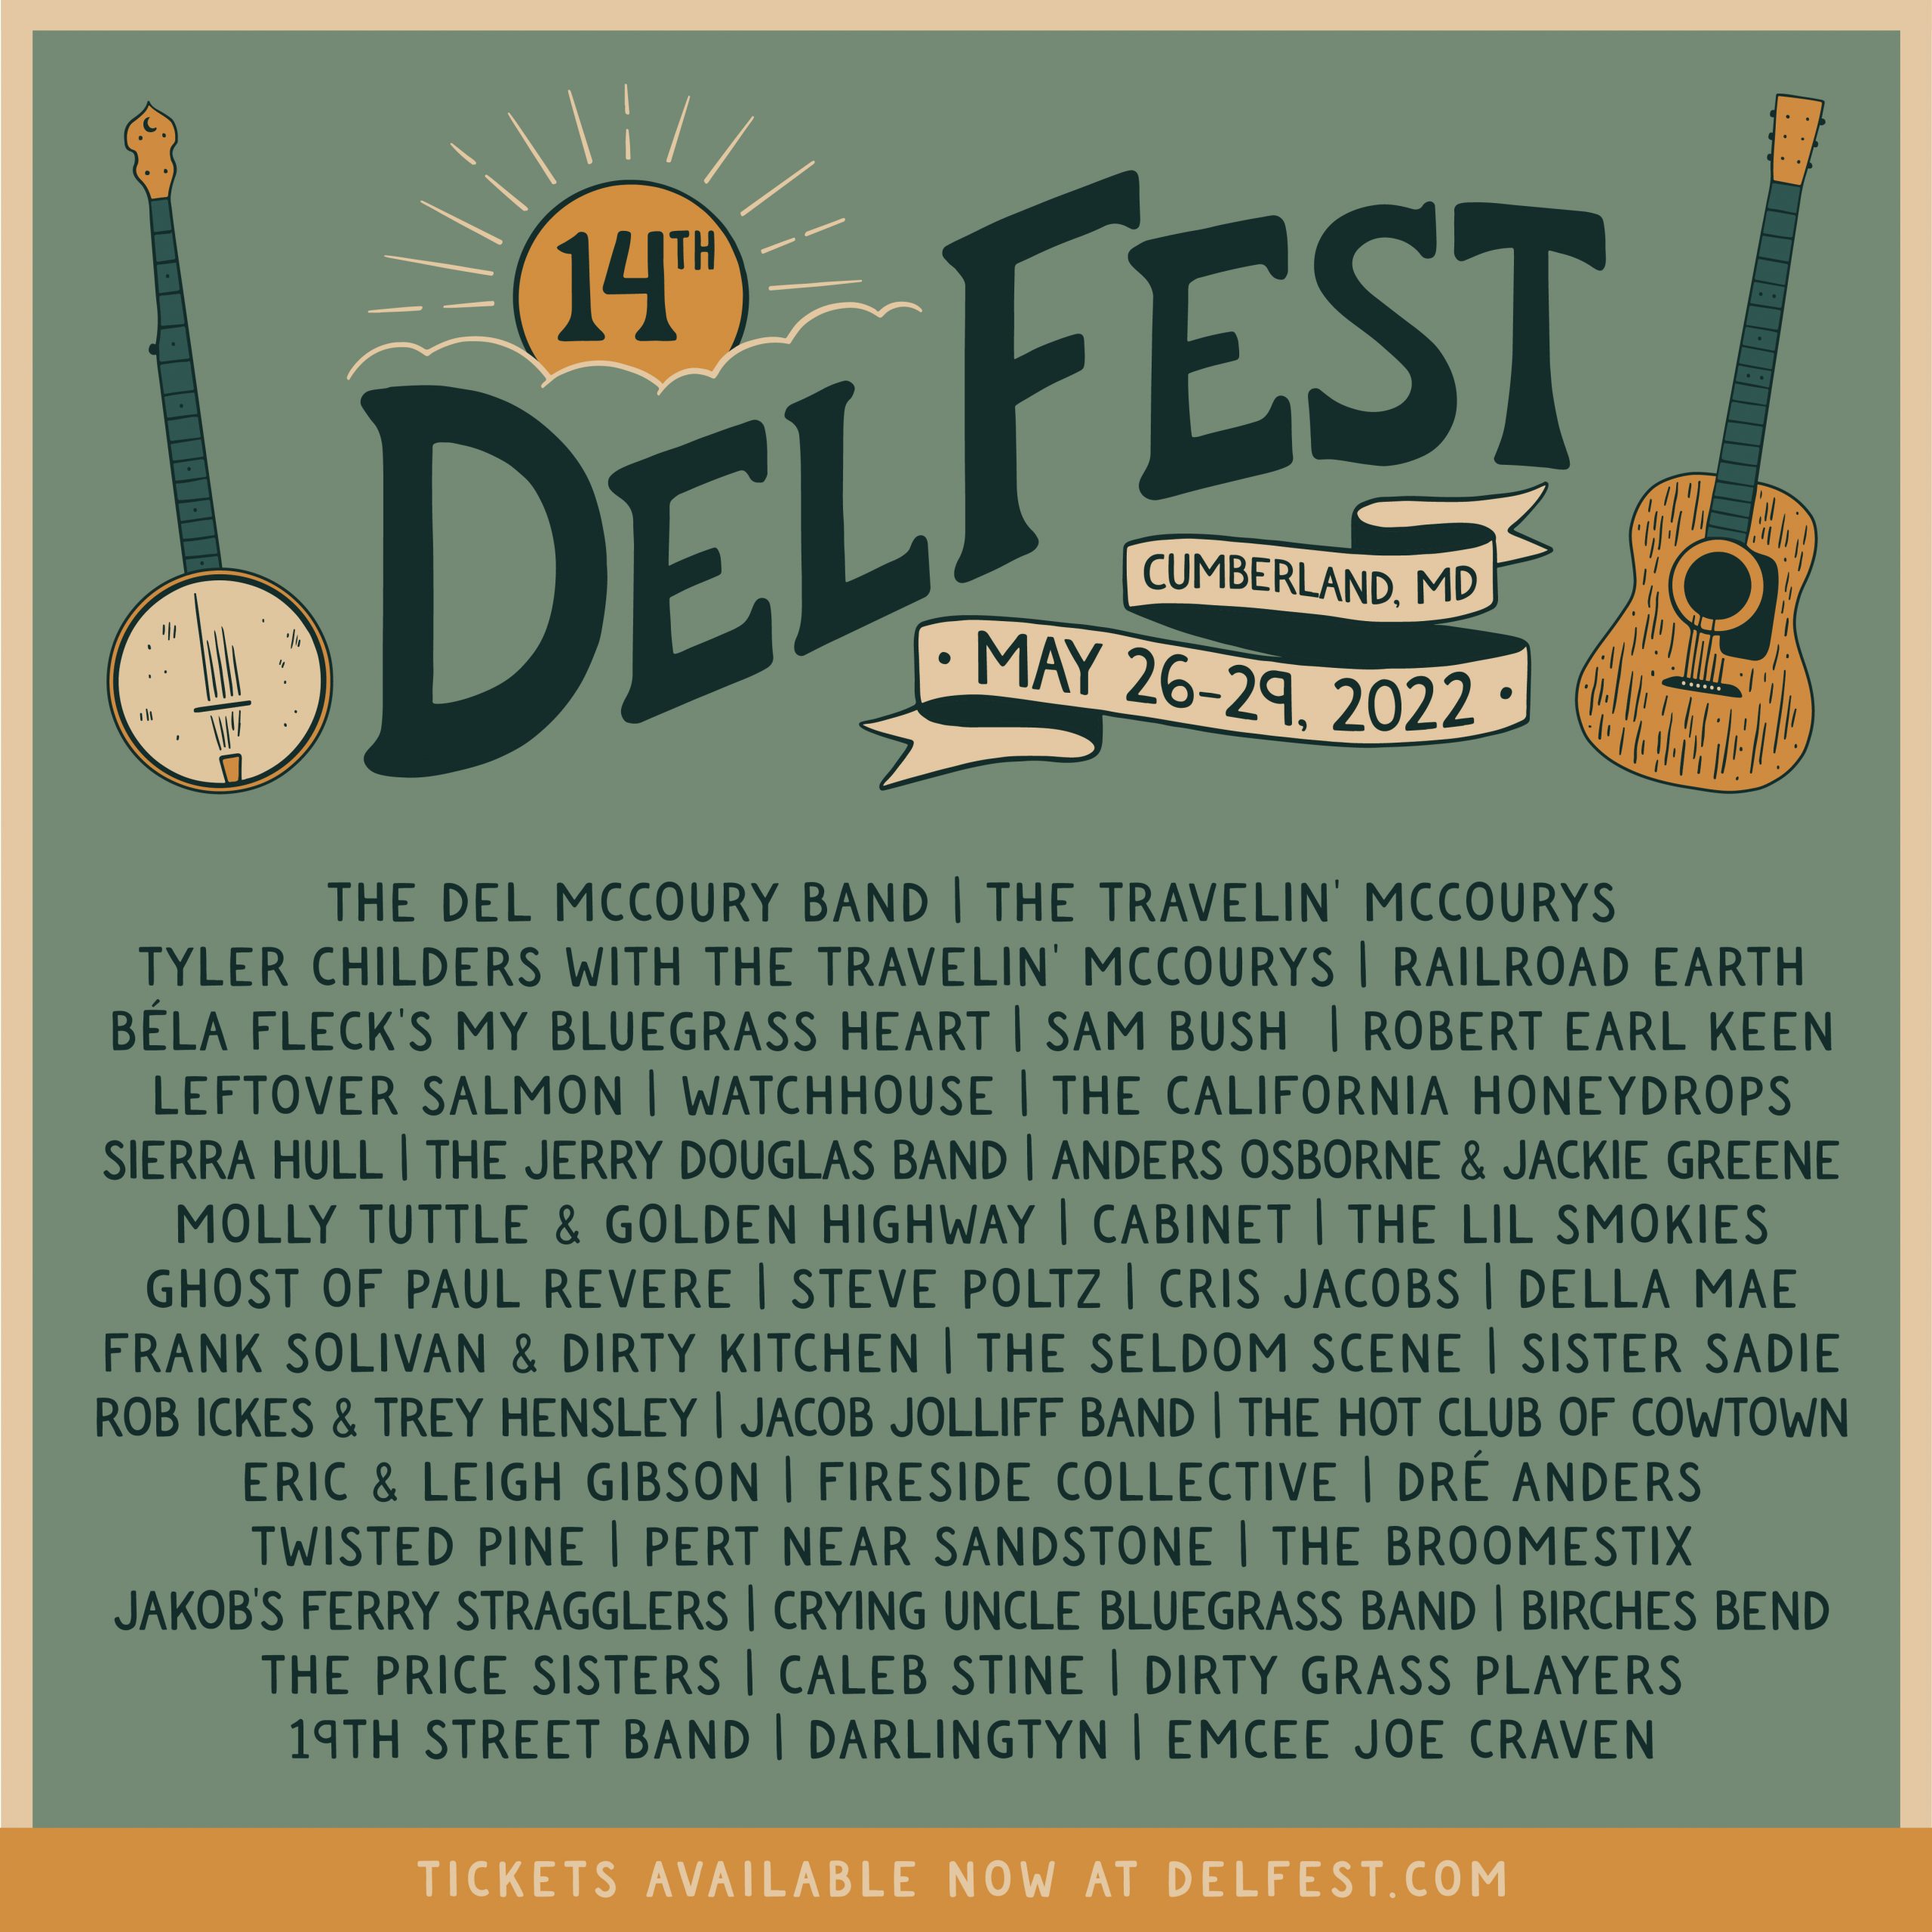 Information On DelFest 2022 and Tyler Childers Has The Travelin